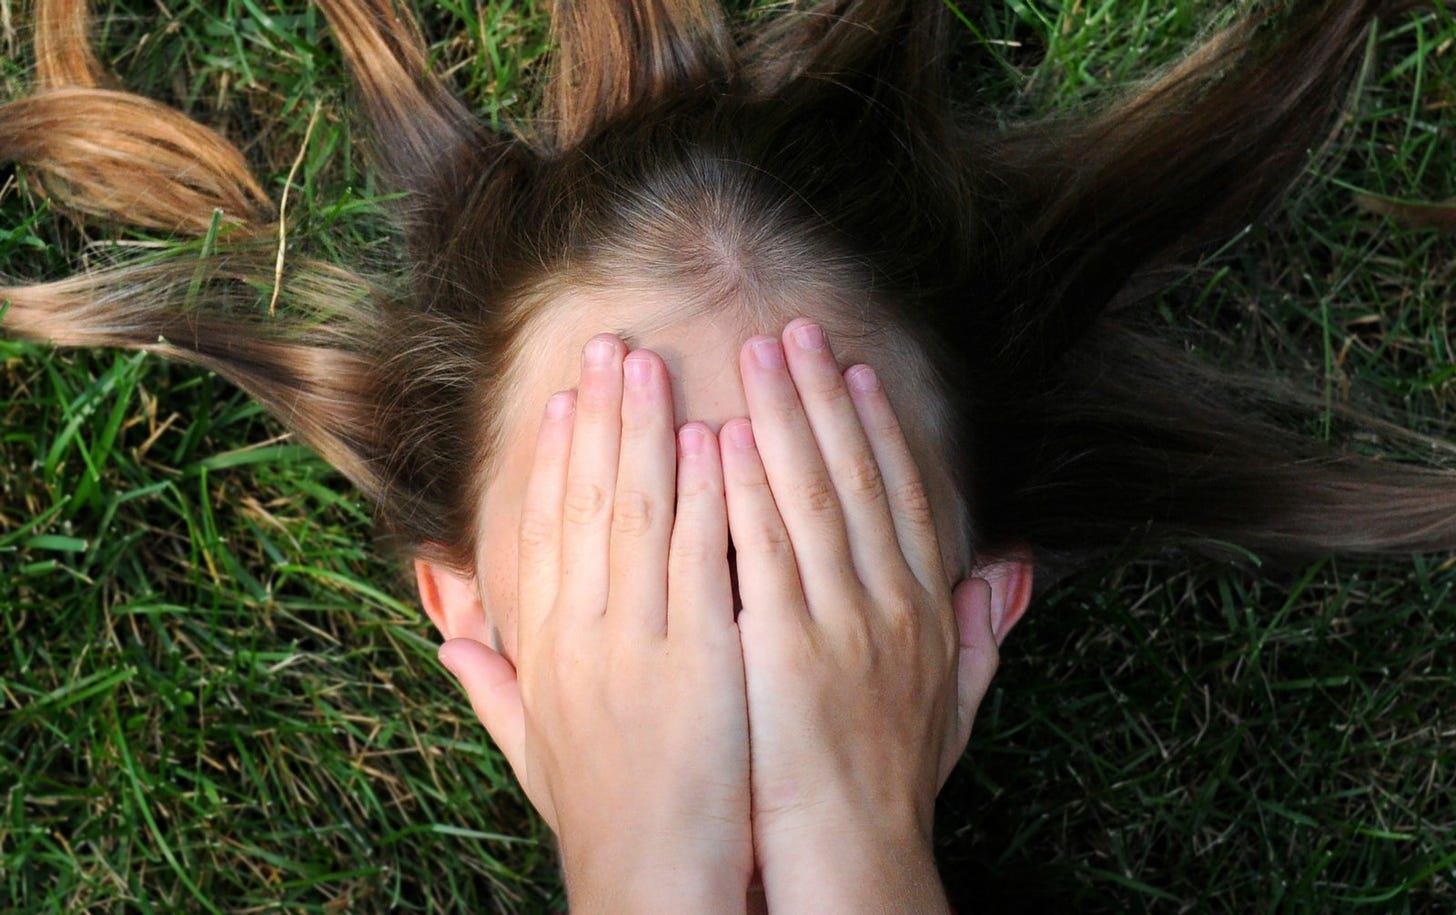 Closeup of a young girl as she covers her face with both hands in fear.